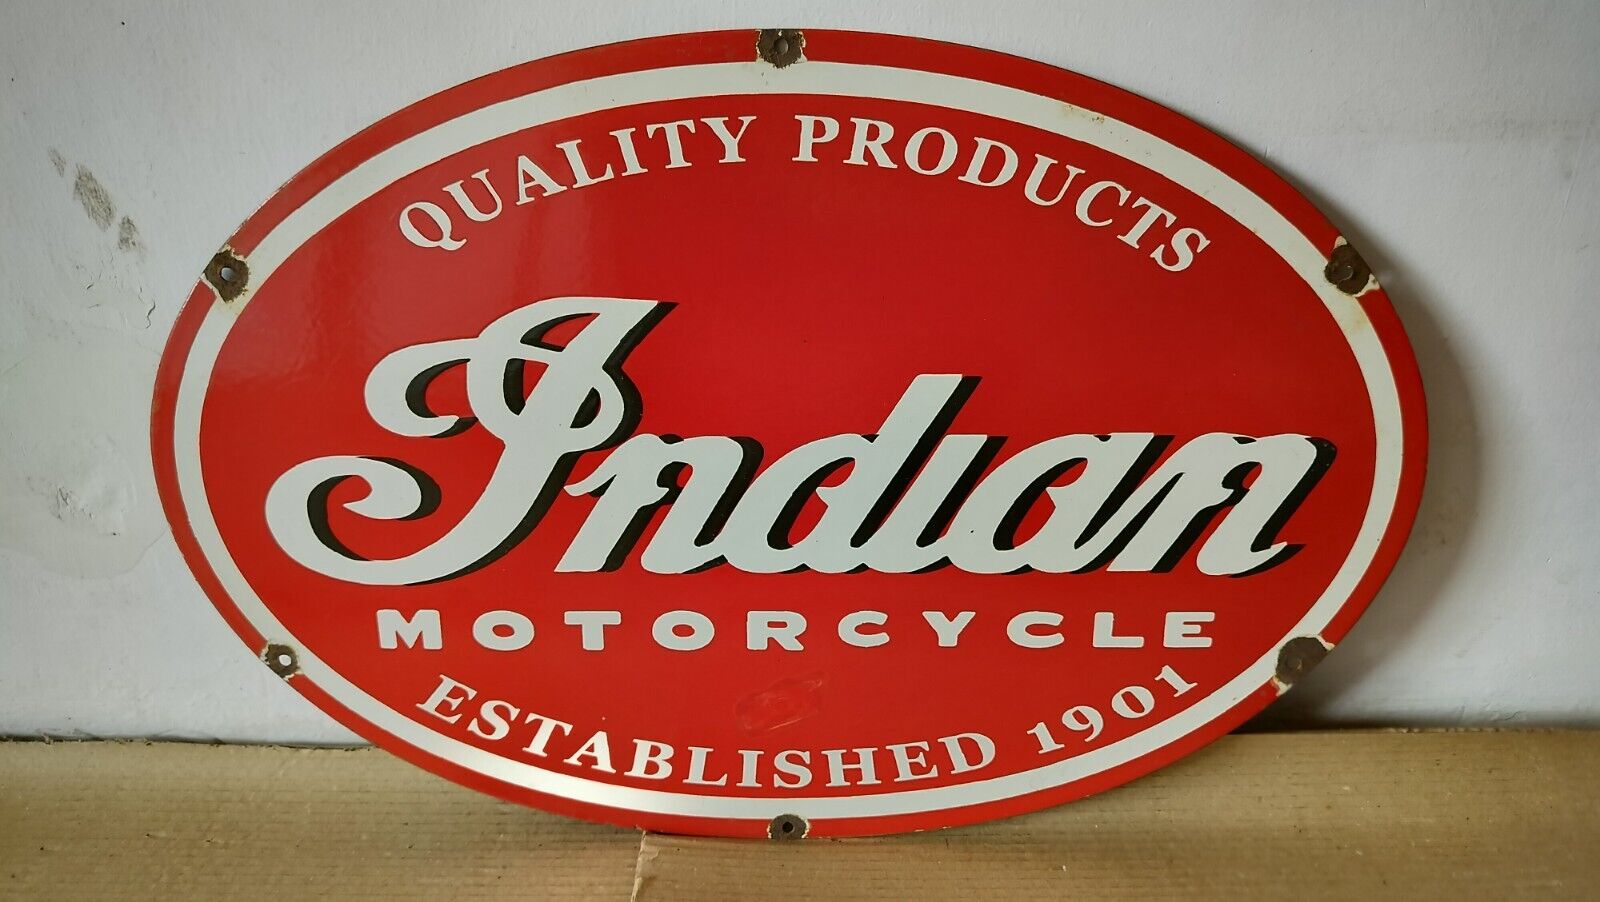 Indian Motorcycle Porcelain Enamel Sign 24 x 16 Inches